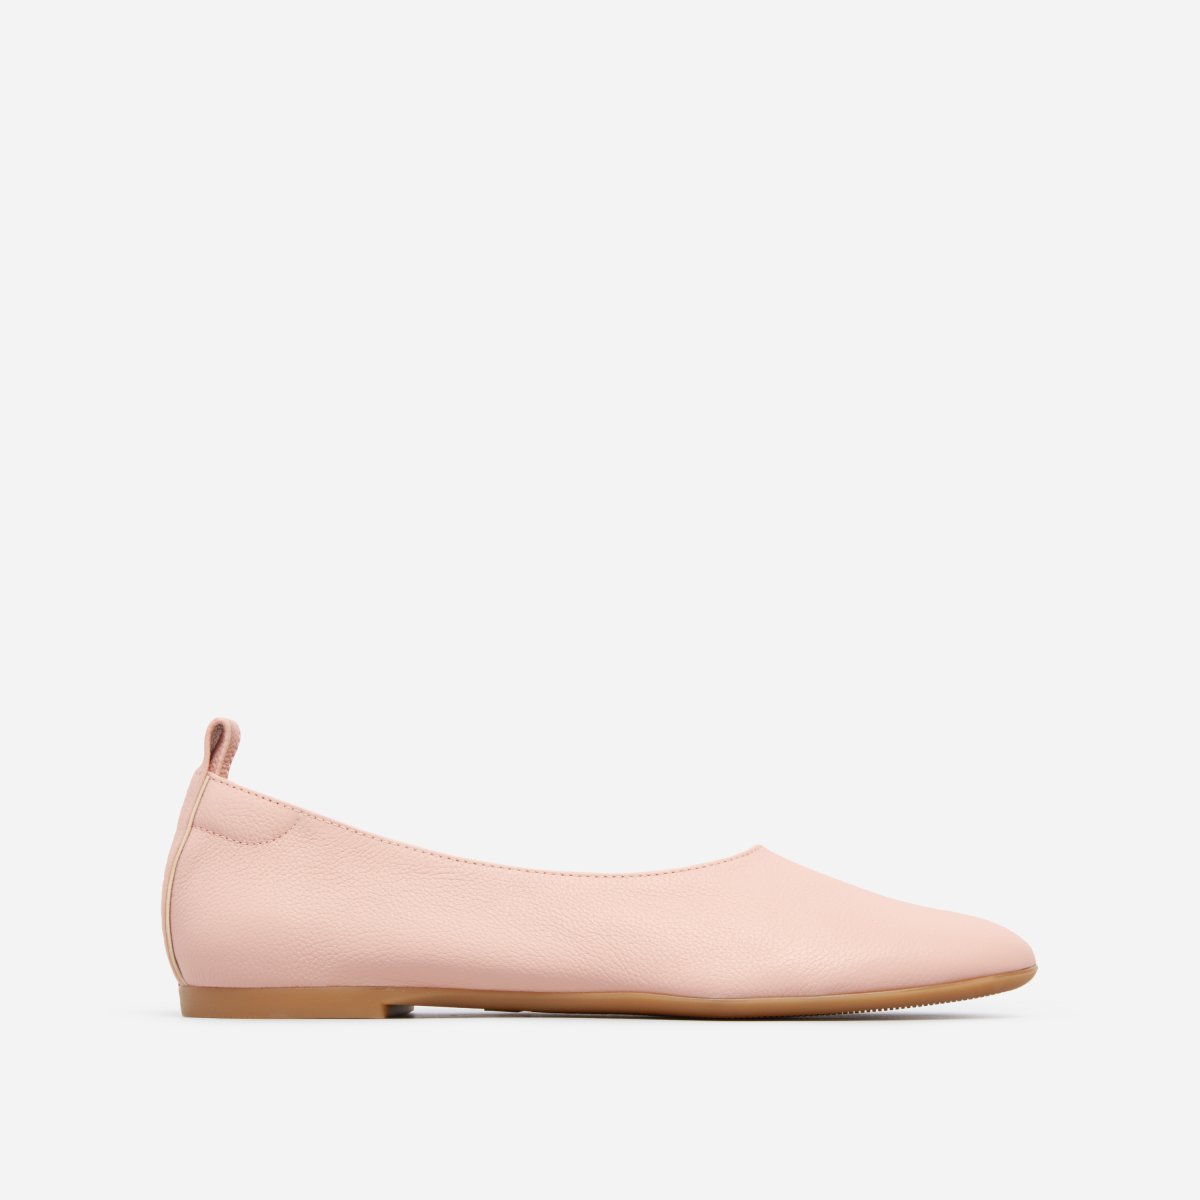 everlane-sustainable-fashion-wearable-every-day